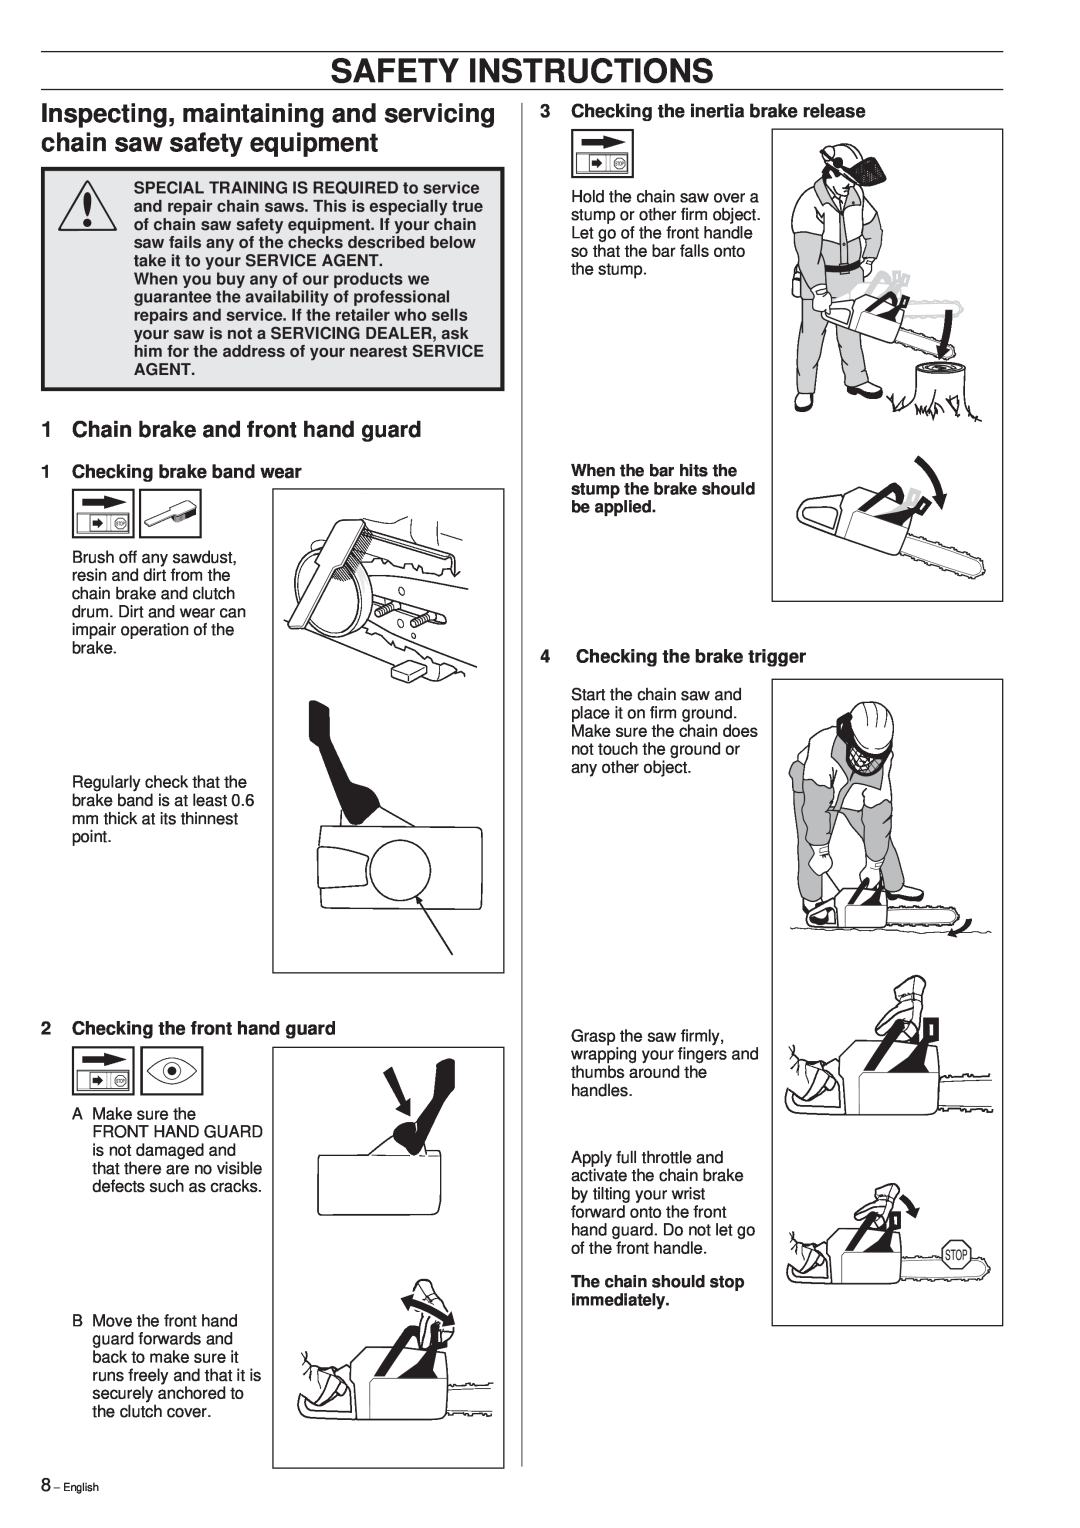 Husqvarna 261 manual Safety Instructions, Inspecting, maintaining and servicing chain saw safety equipment 